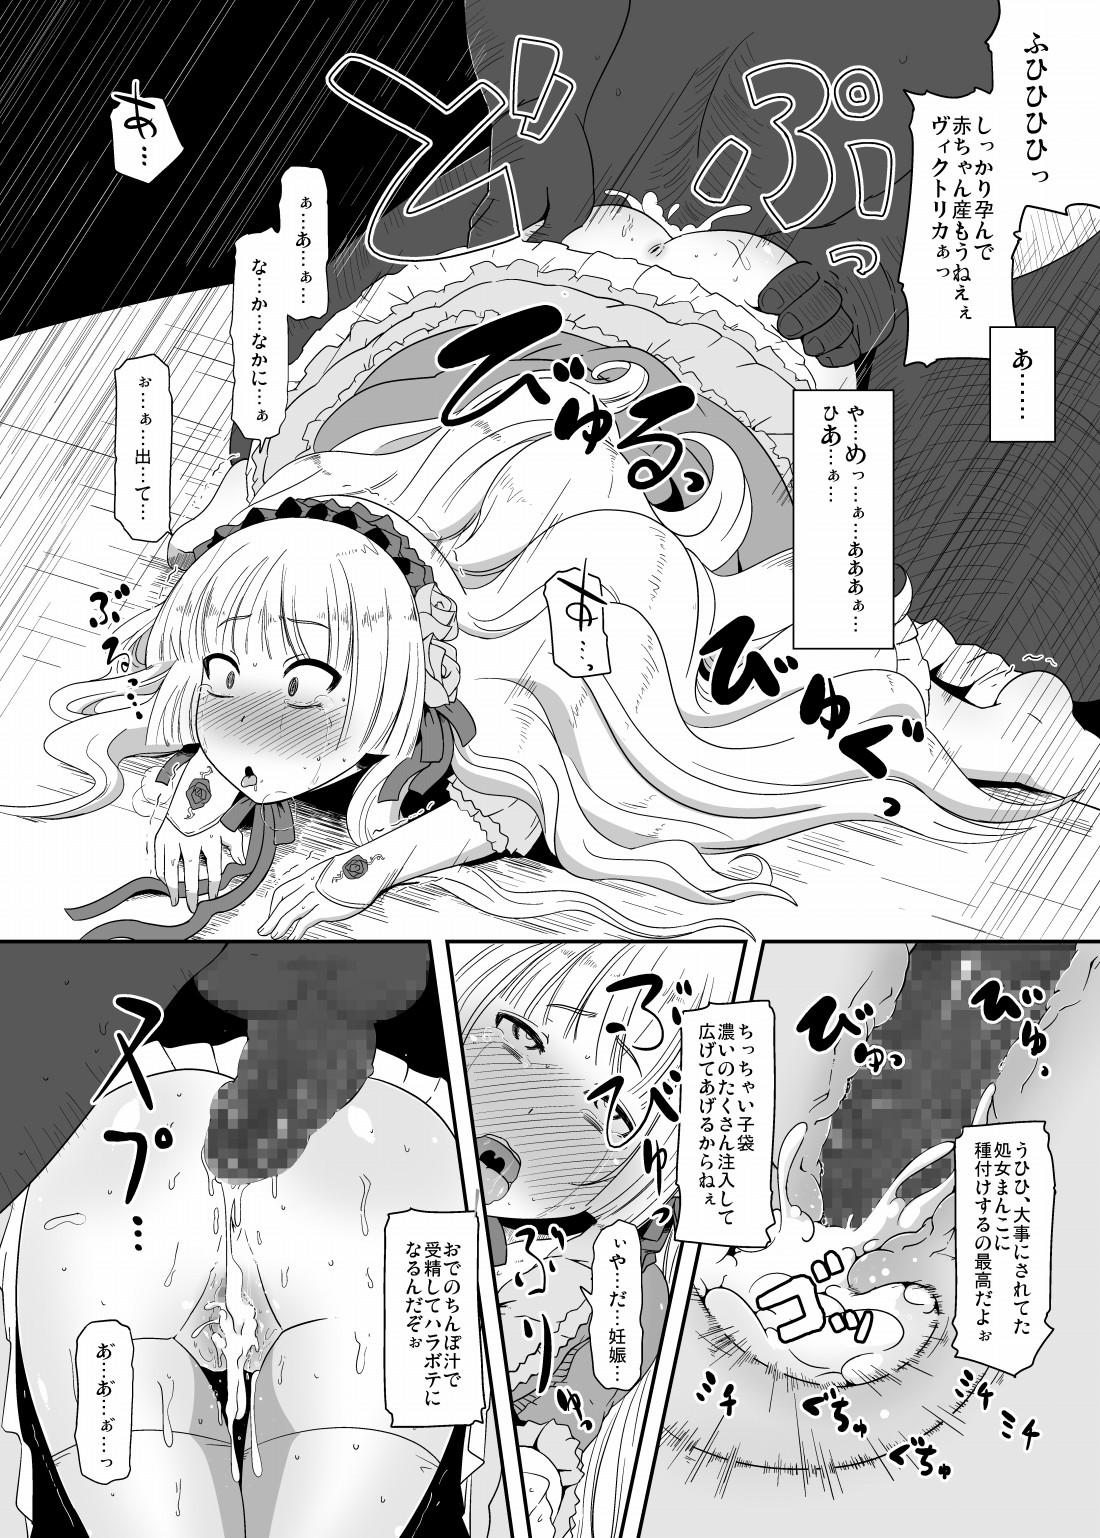 Ass Sex 孕ゴシックちゃん - Gosick Wet Cunt - Page 5